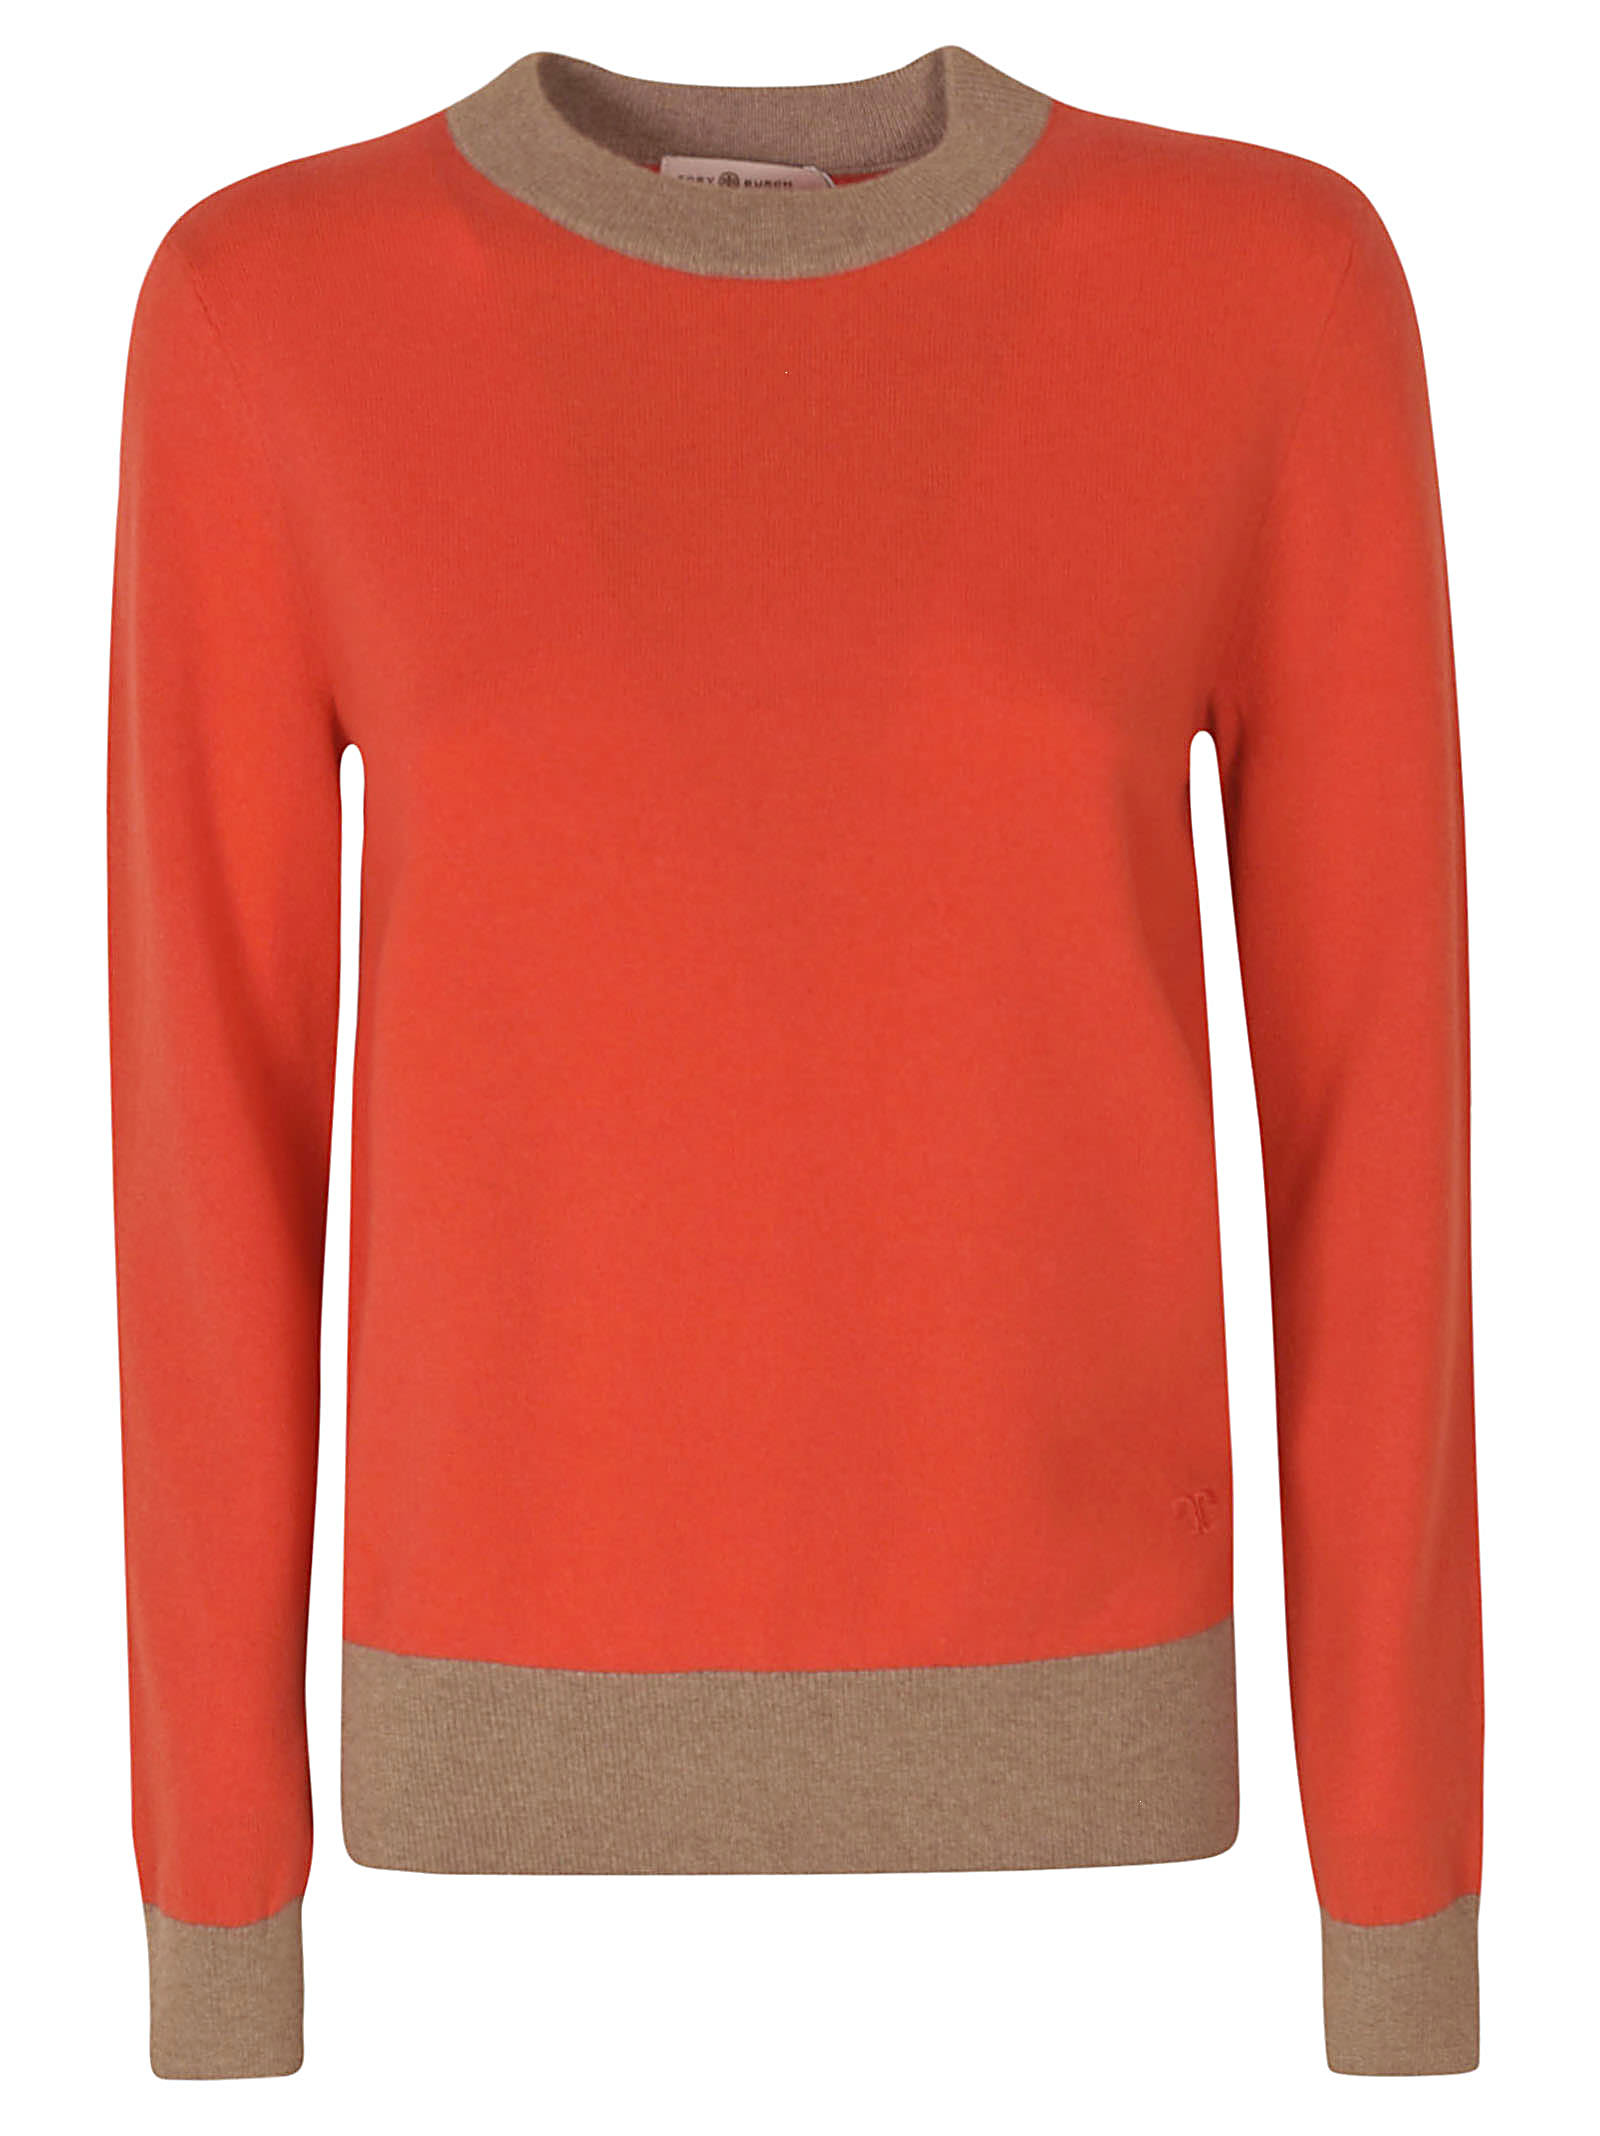 Tory Burch Color-block Cashmere Pullover